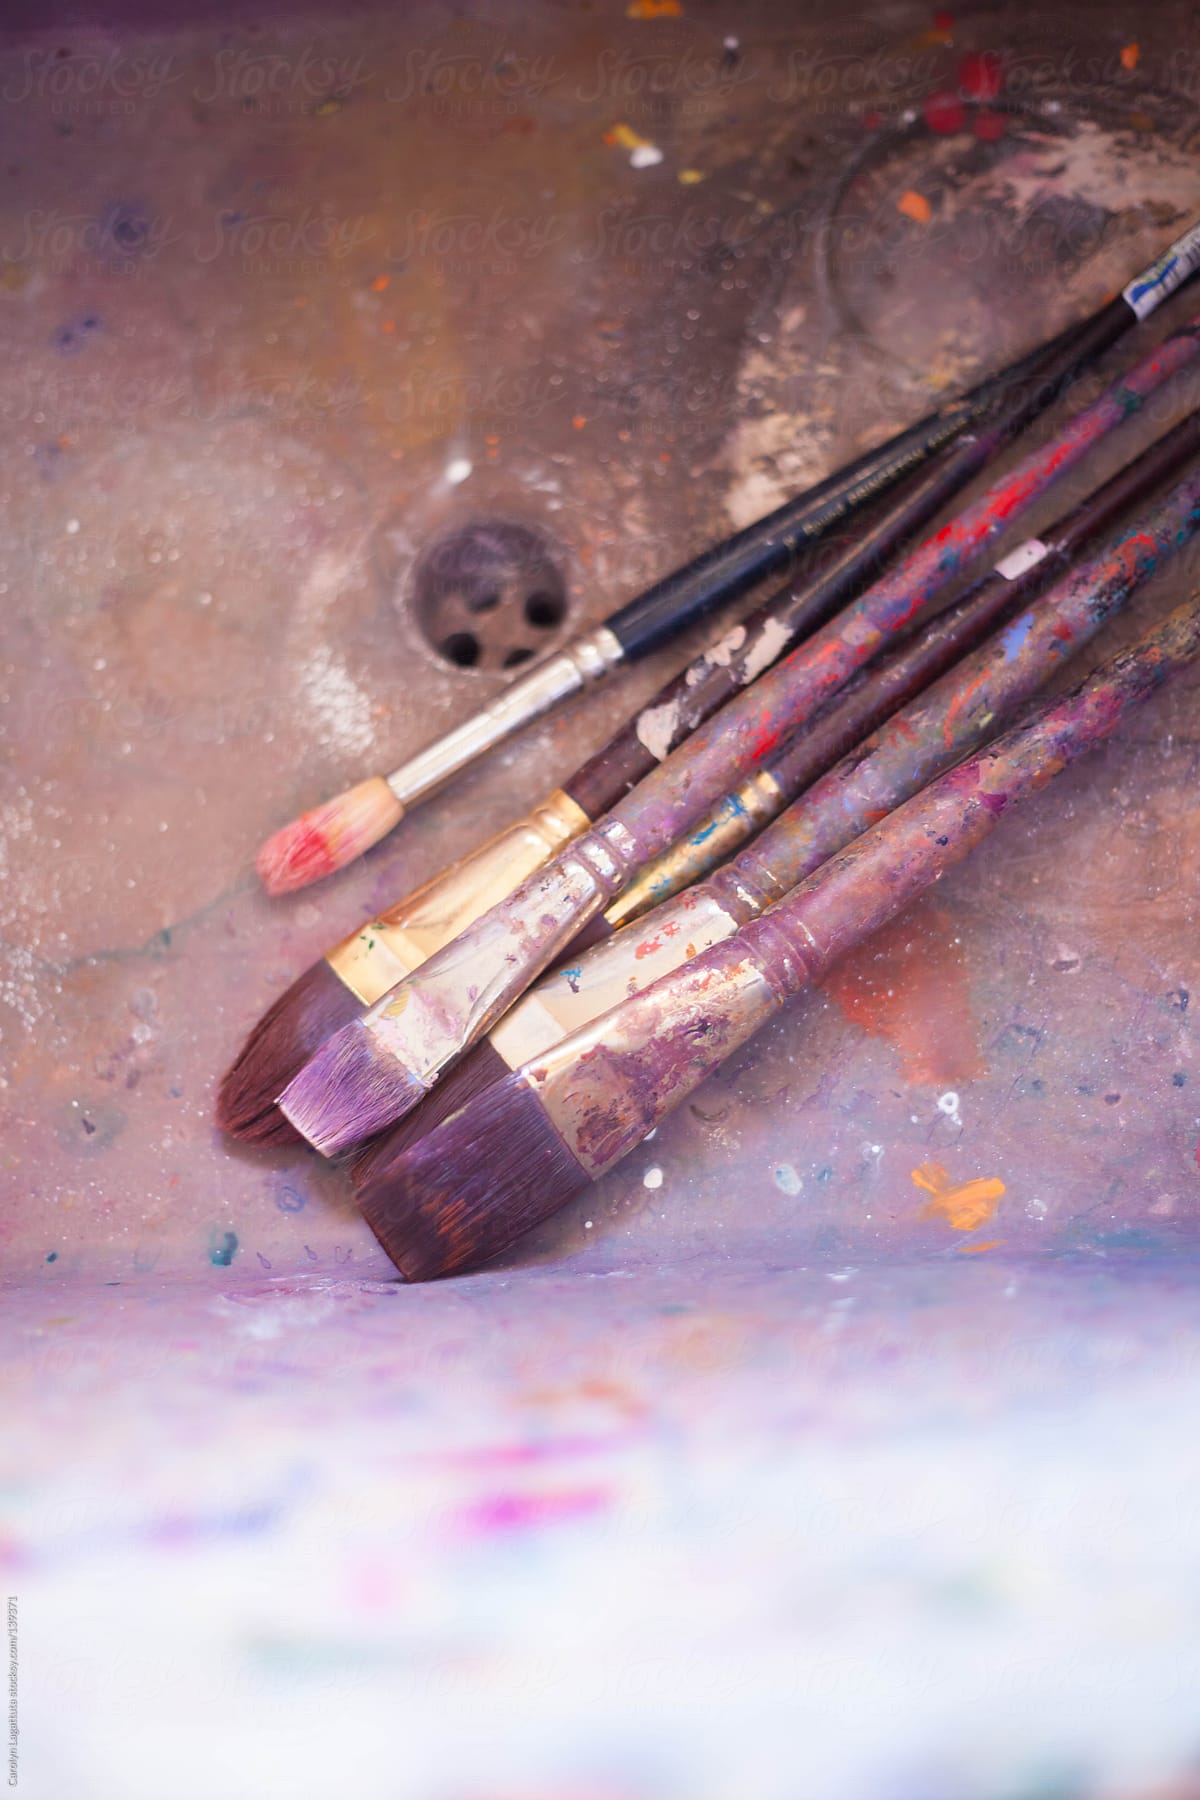 An artist\'s brushes in the sink - splattered with paint